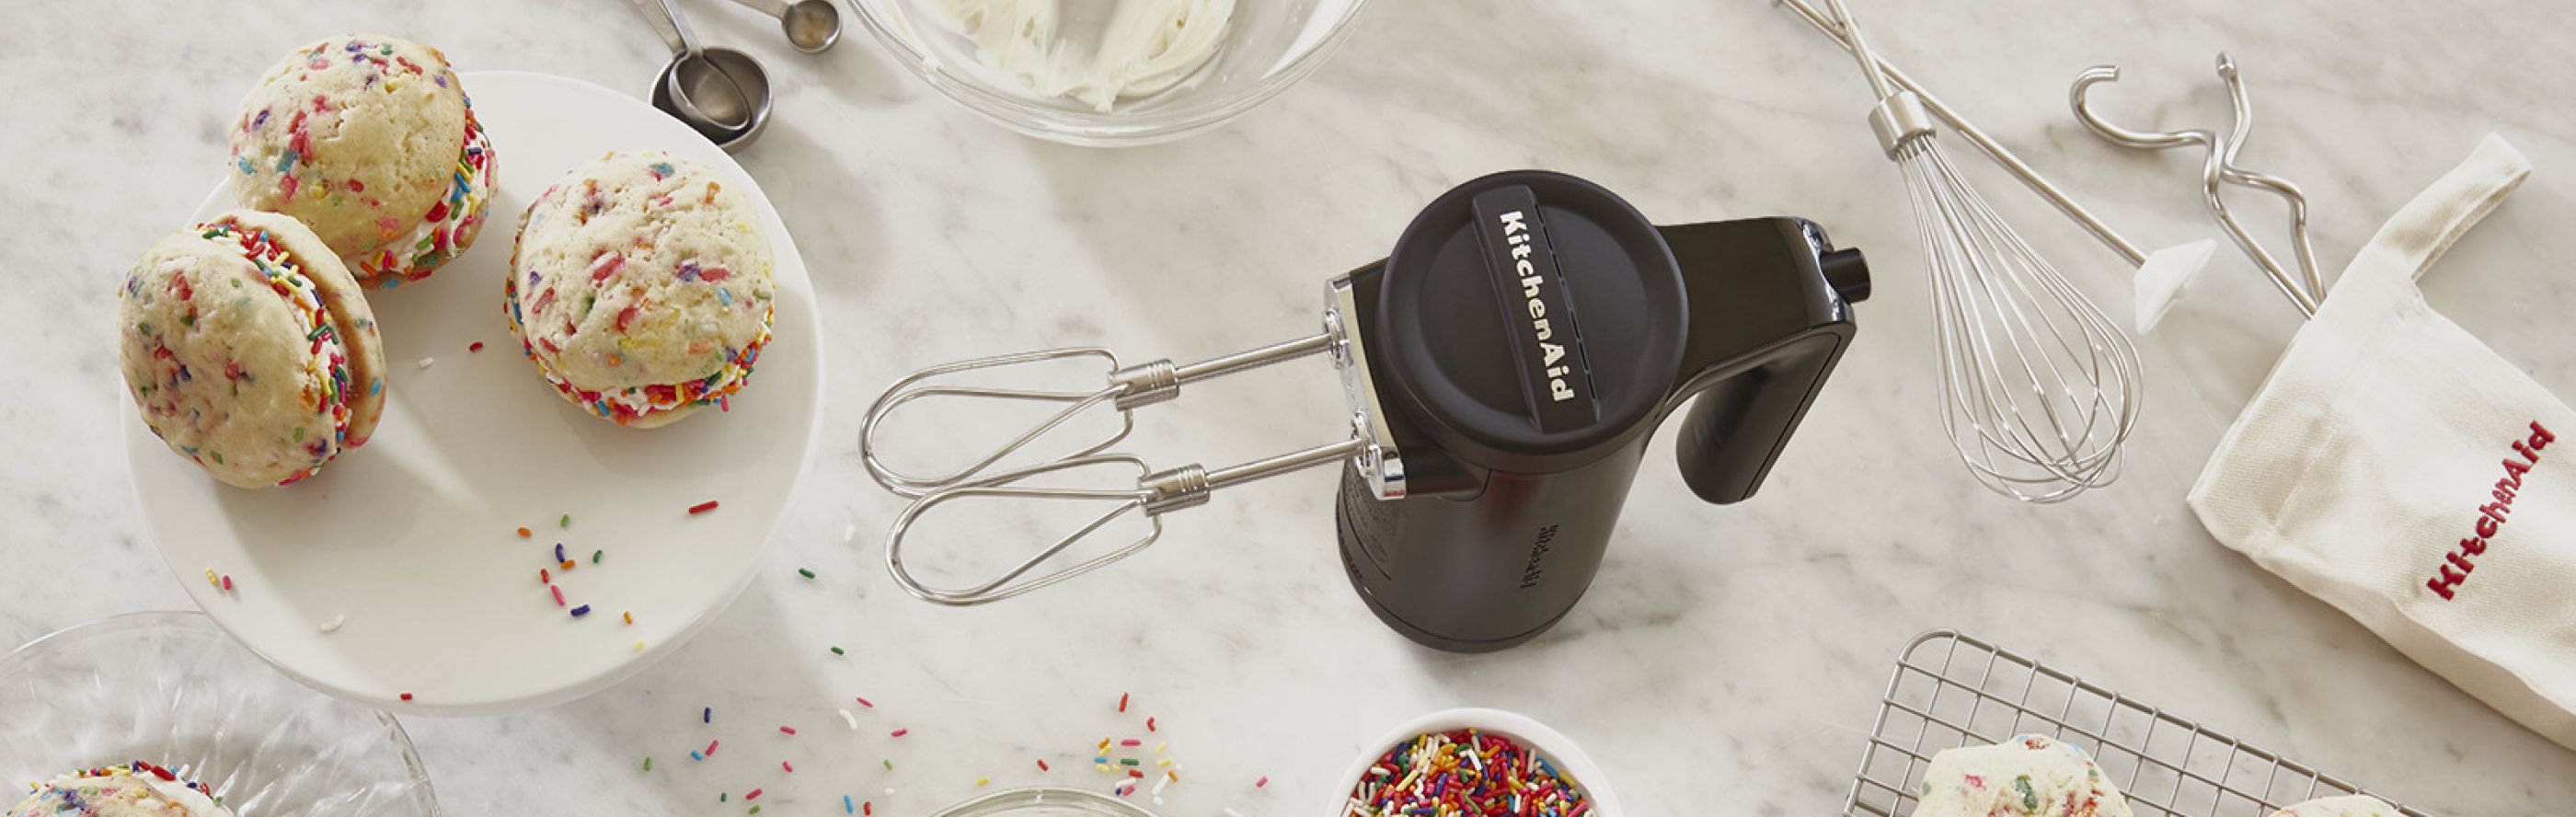 Hand mixer next to cookies on counter